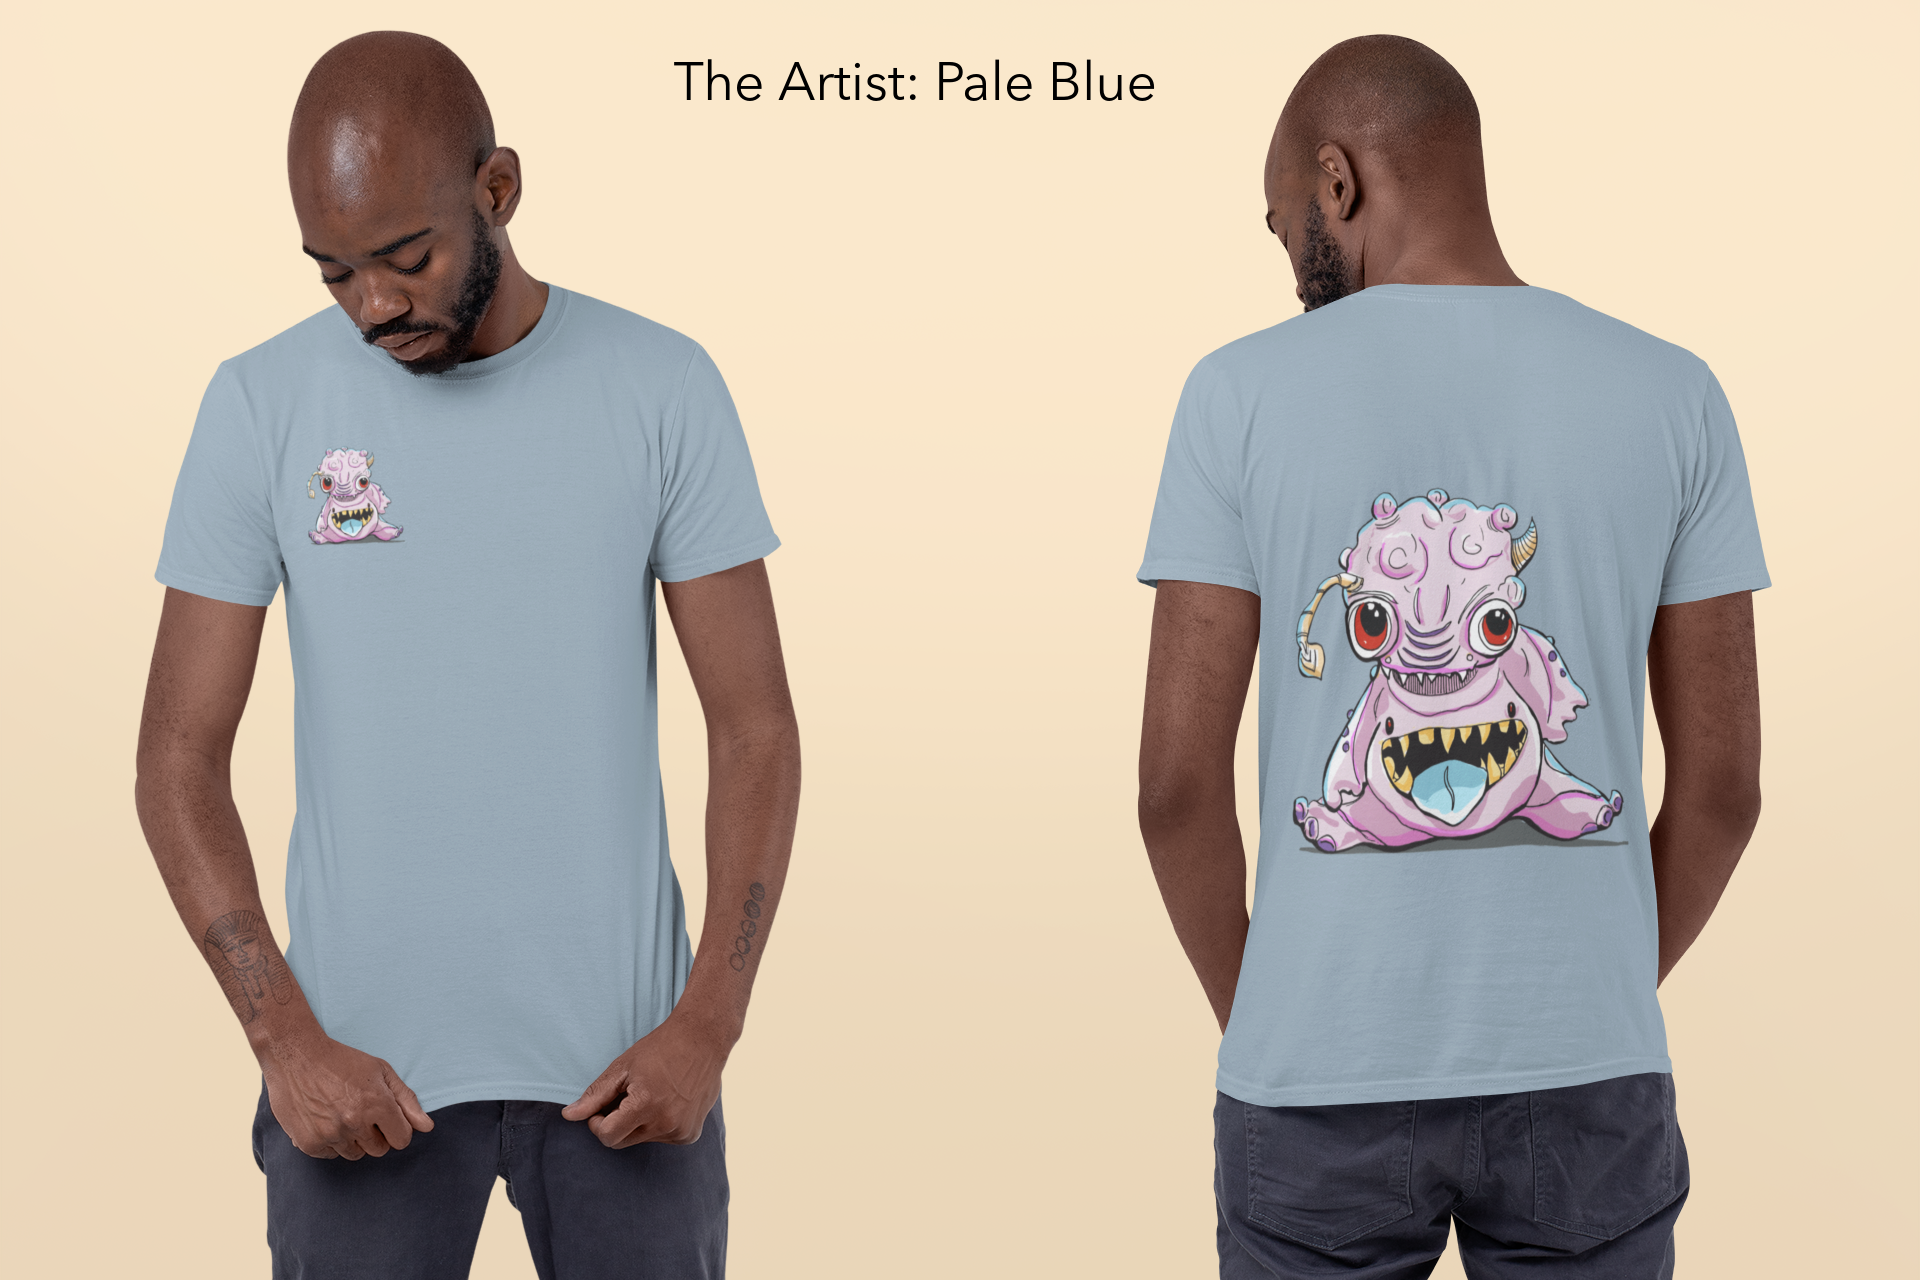 front and back shot of a dark skinned man in a pale blue shirt. With a pink bublegum looking alien creature on the front and back of the shirt The creature full back shirt display and small "pocket" display on the front